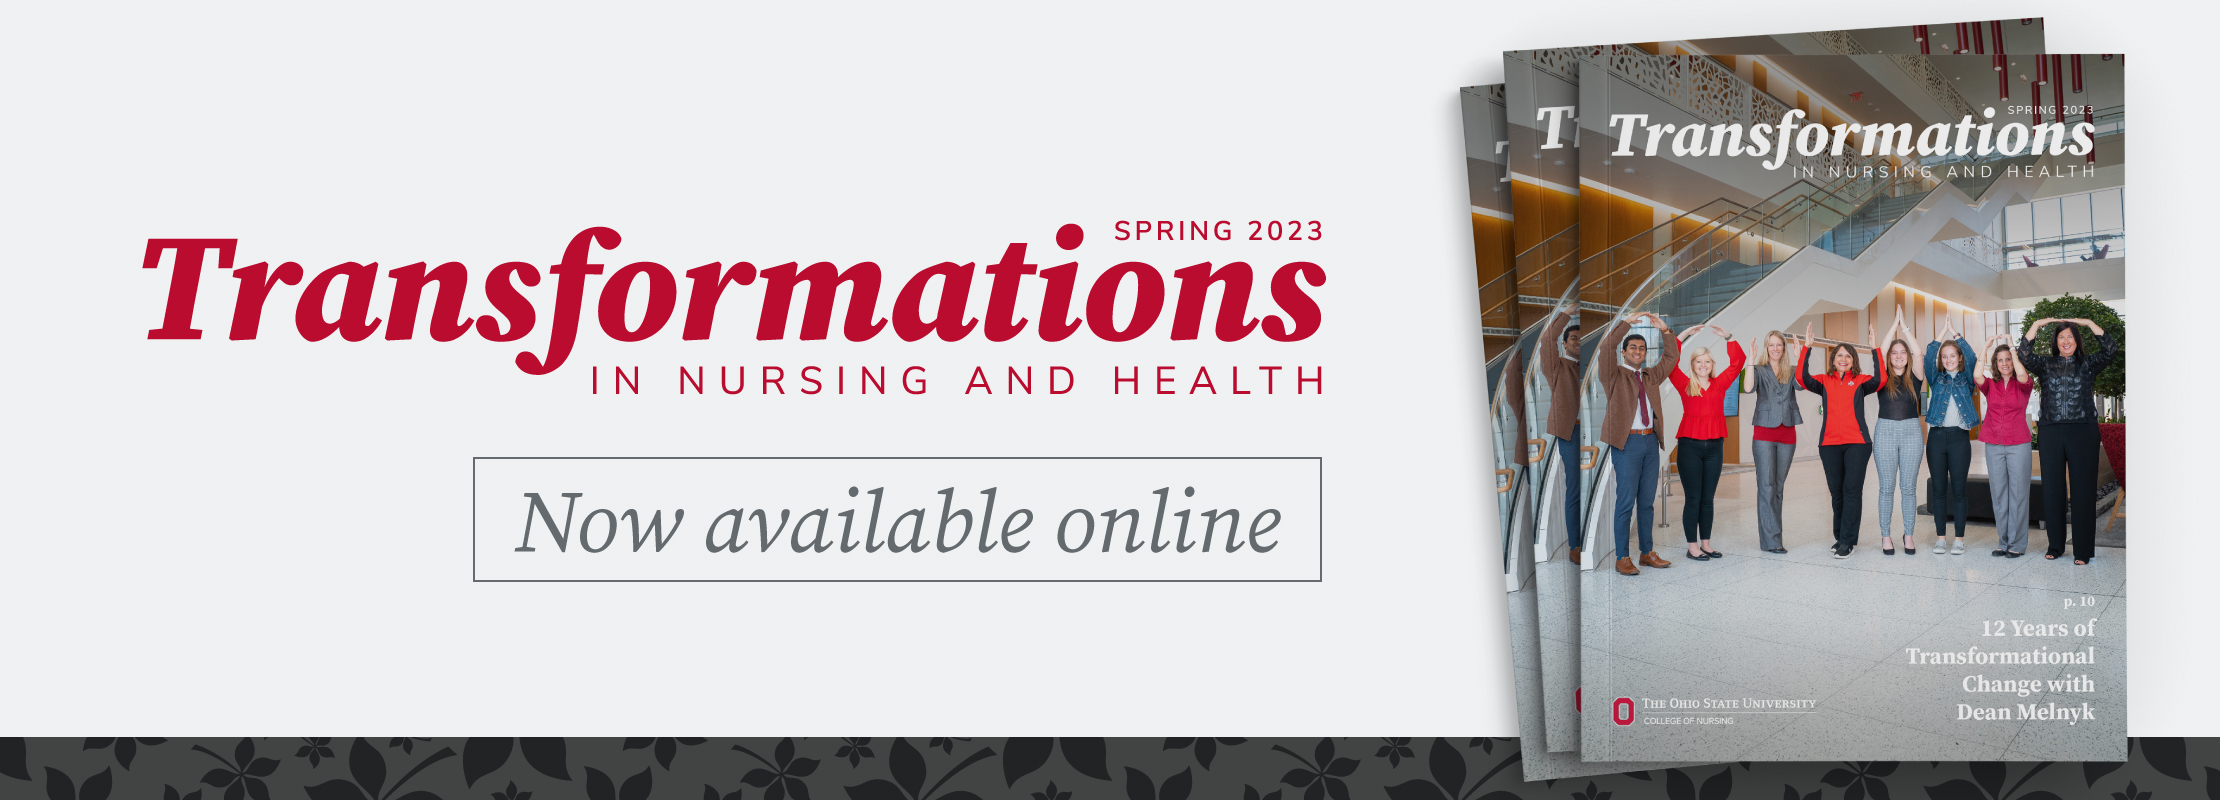 Transformations Spring 2023 now available online